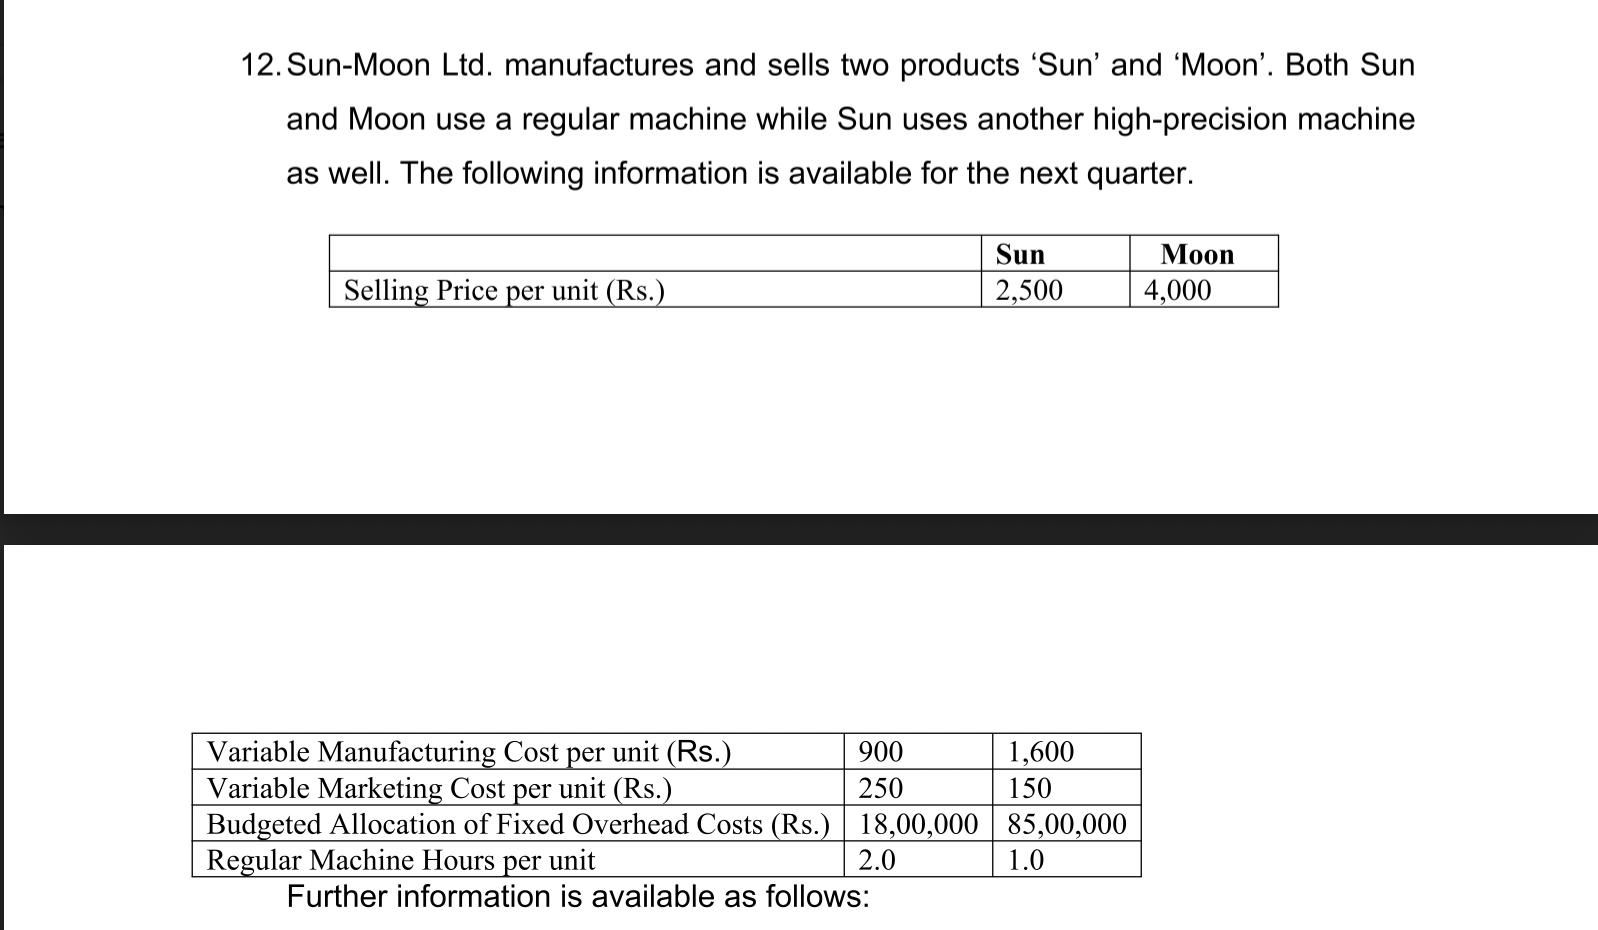 12. Sun-Moon Ltd. manufactures and sells two products 'Sun' and 'Moon'. Both Sun and Moon use a regular